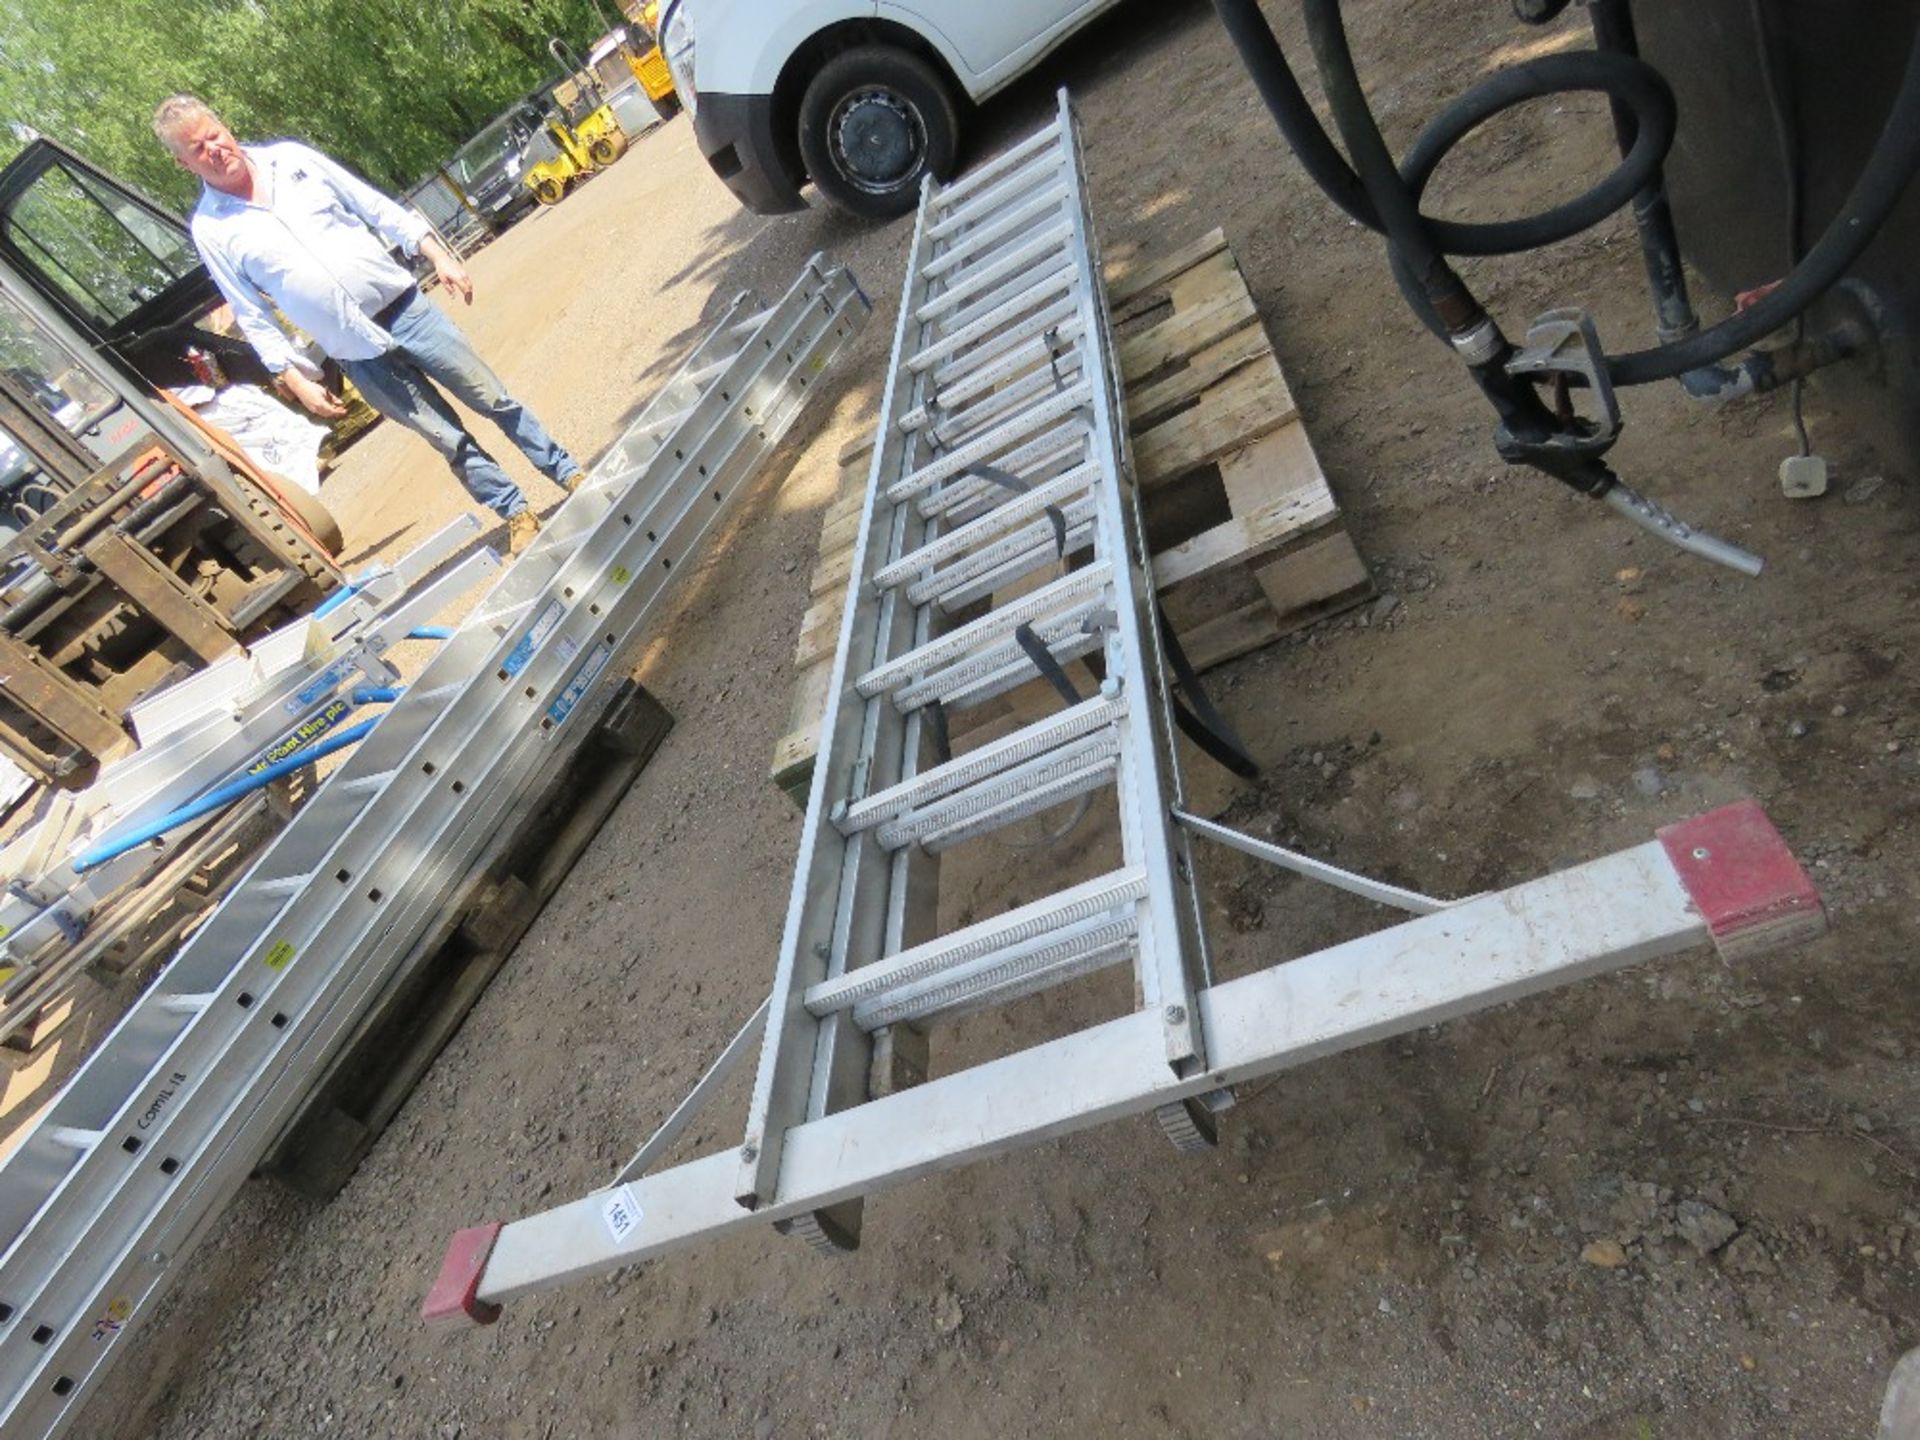 ALUMINIUM 3 STAGE LADDER, 10FT CLOSED LENGTH APPROX. - Image 2 of 3